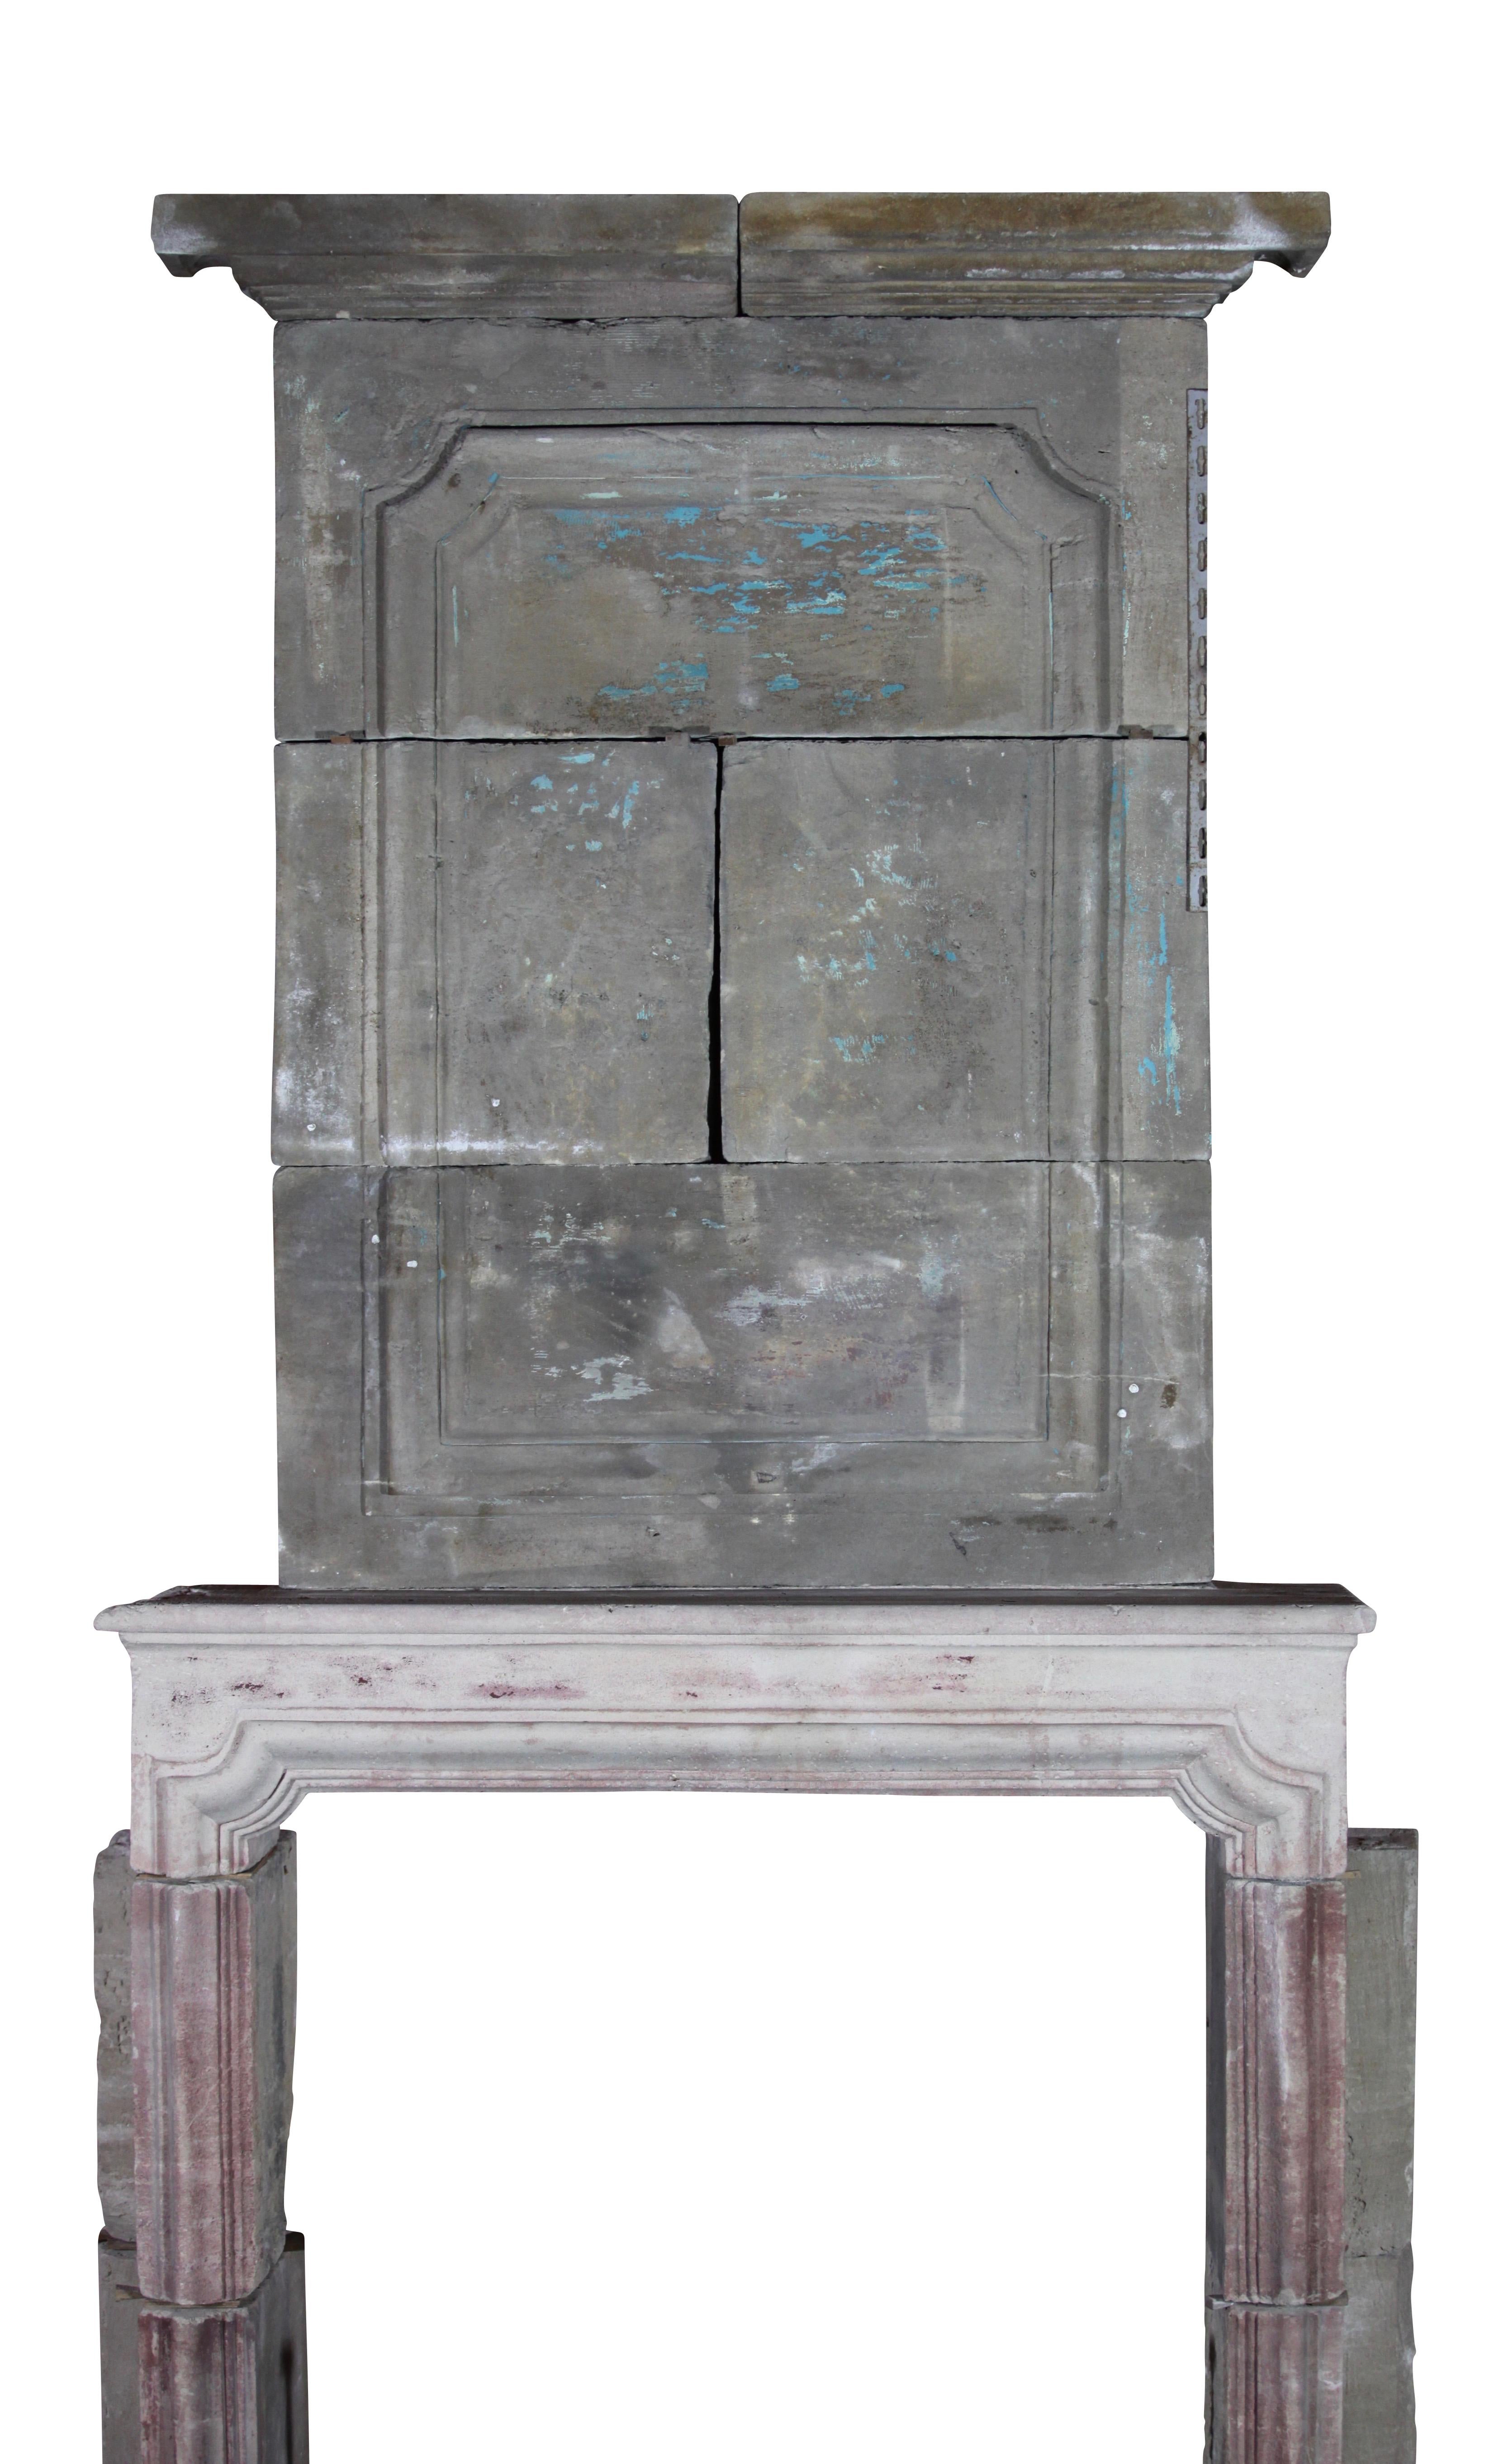 This rustic original antique fireplace surround in Grez limestone has small proportions. While the front piece looks clearer due to the original patina in real the difference is less. A perfect fireplace piece to chalk, the old fashion way.